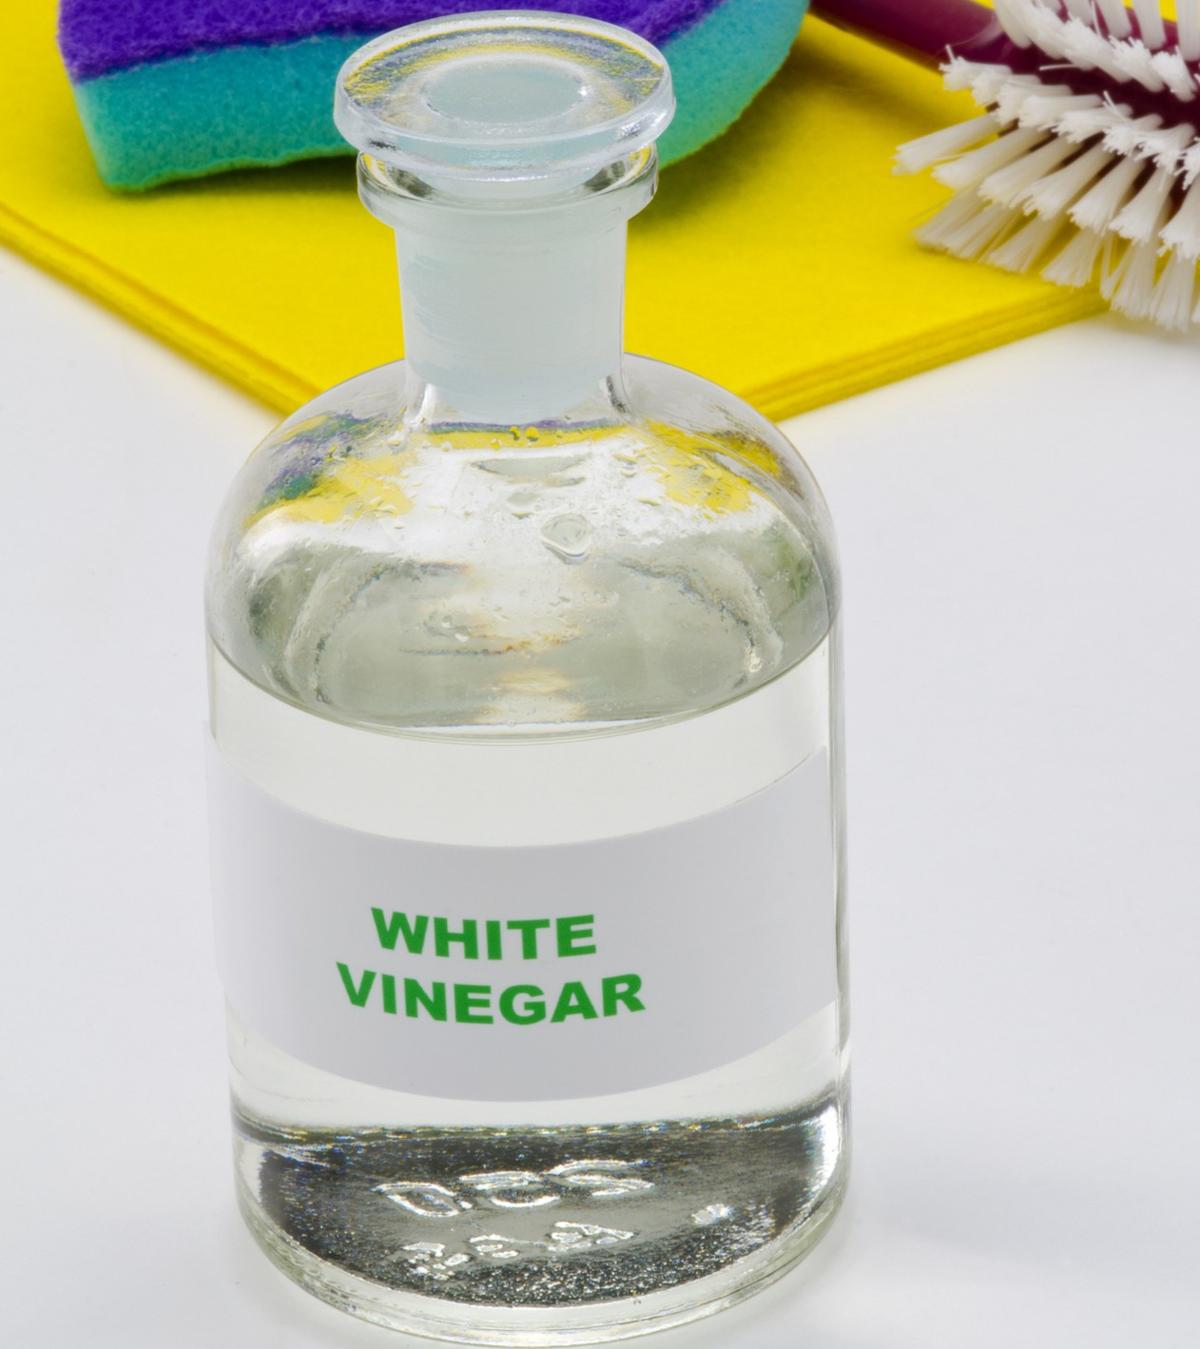 Rice Wine Vinegar Substitutes Straight from Your Own Kitchen - Tastessence